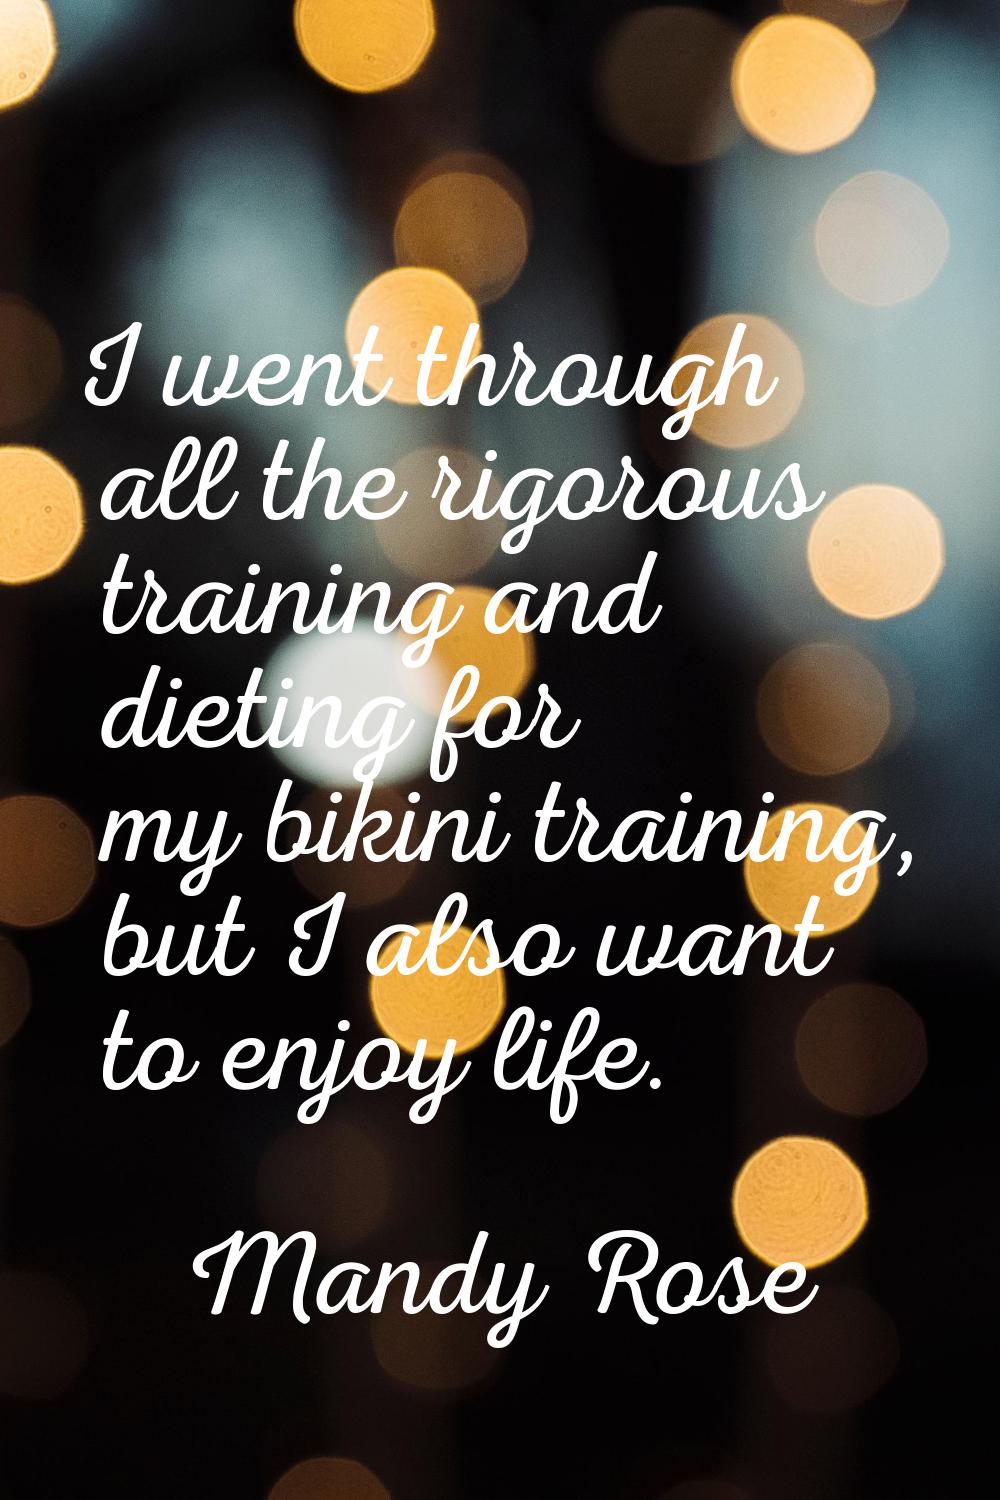 I went through all the rigorous training and dieting for my bikini training, but I also want to enj